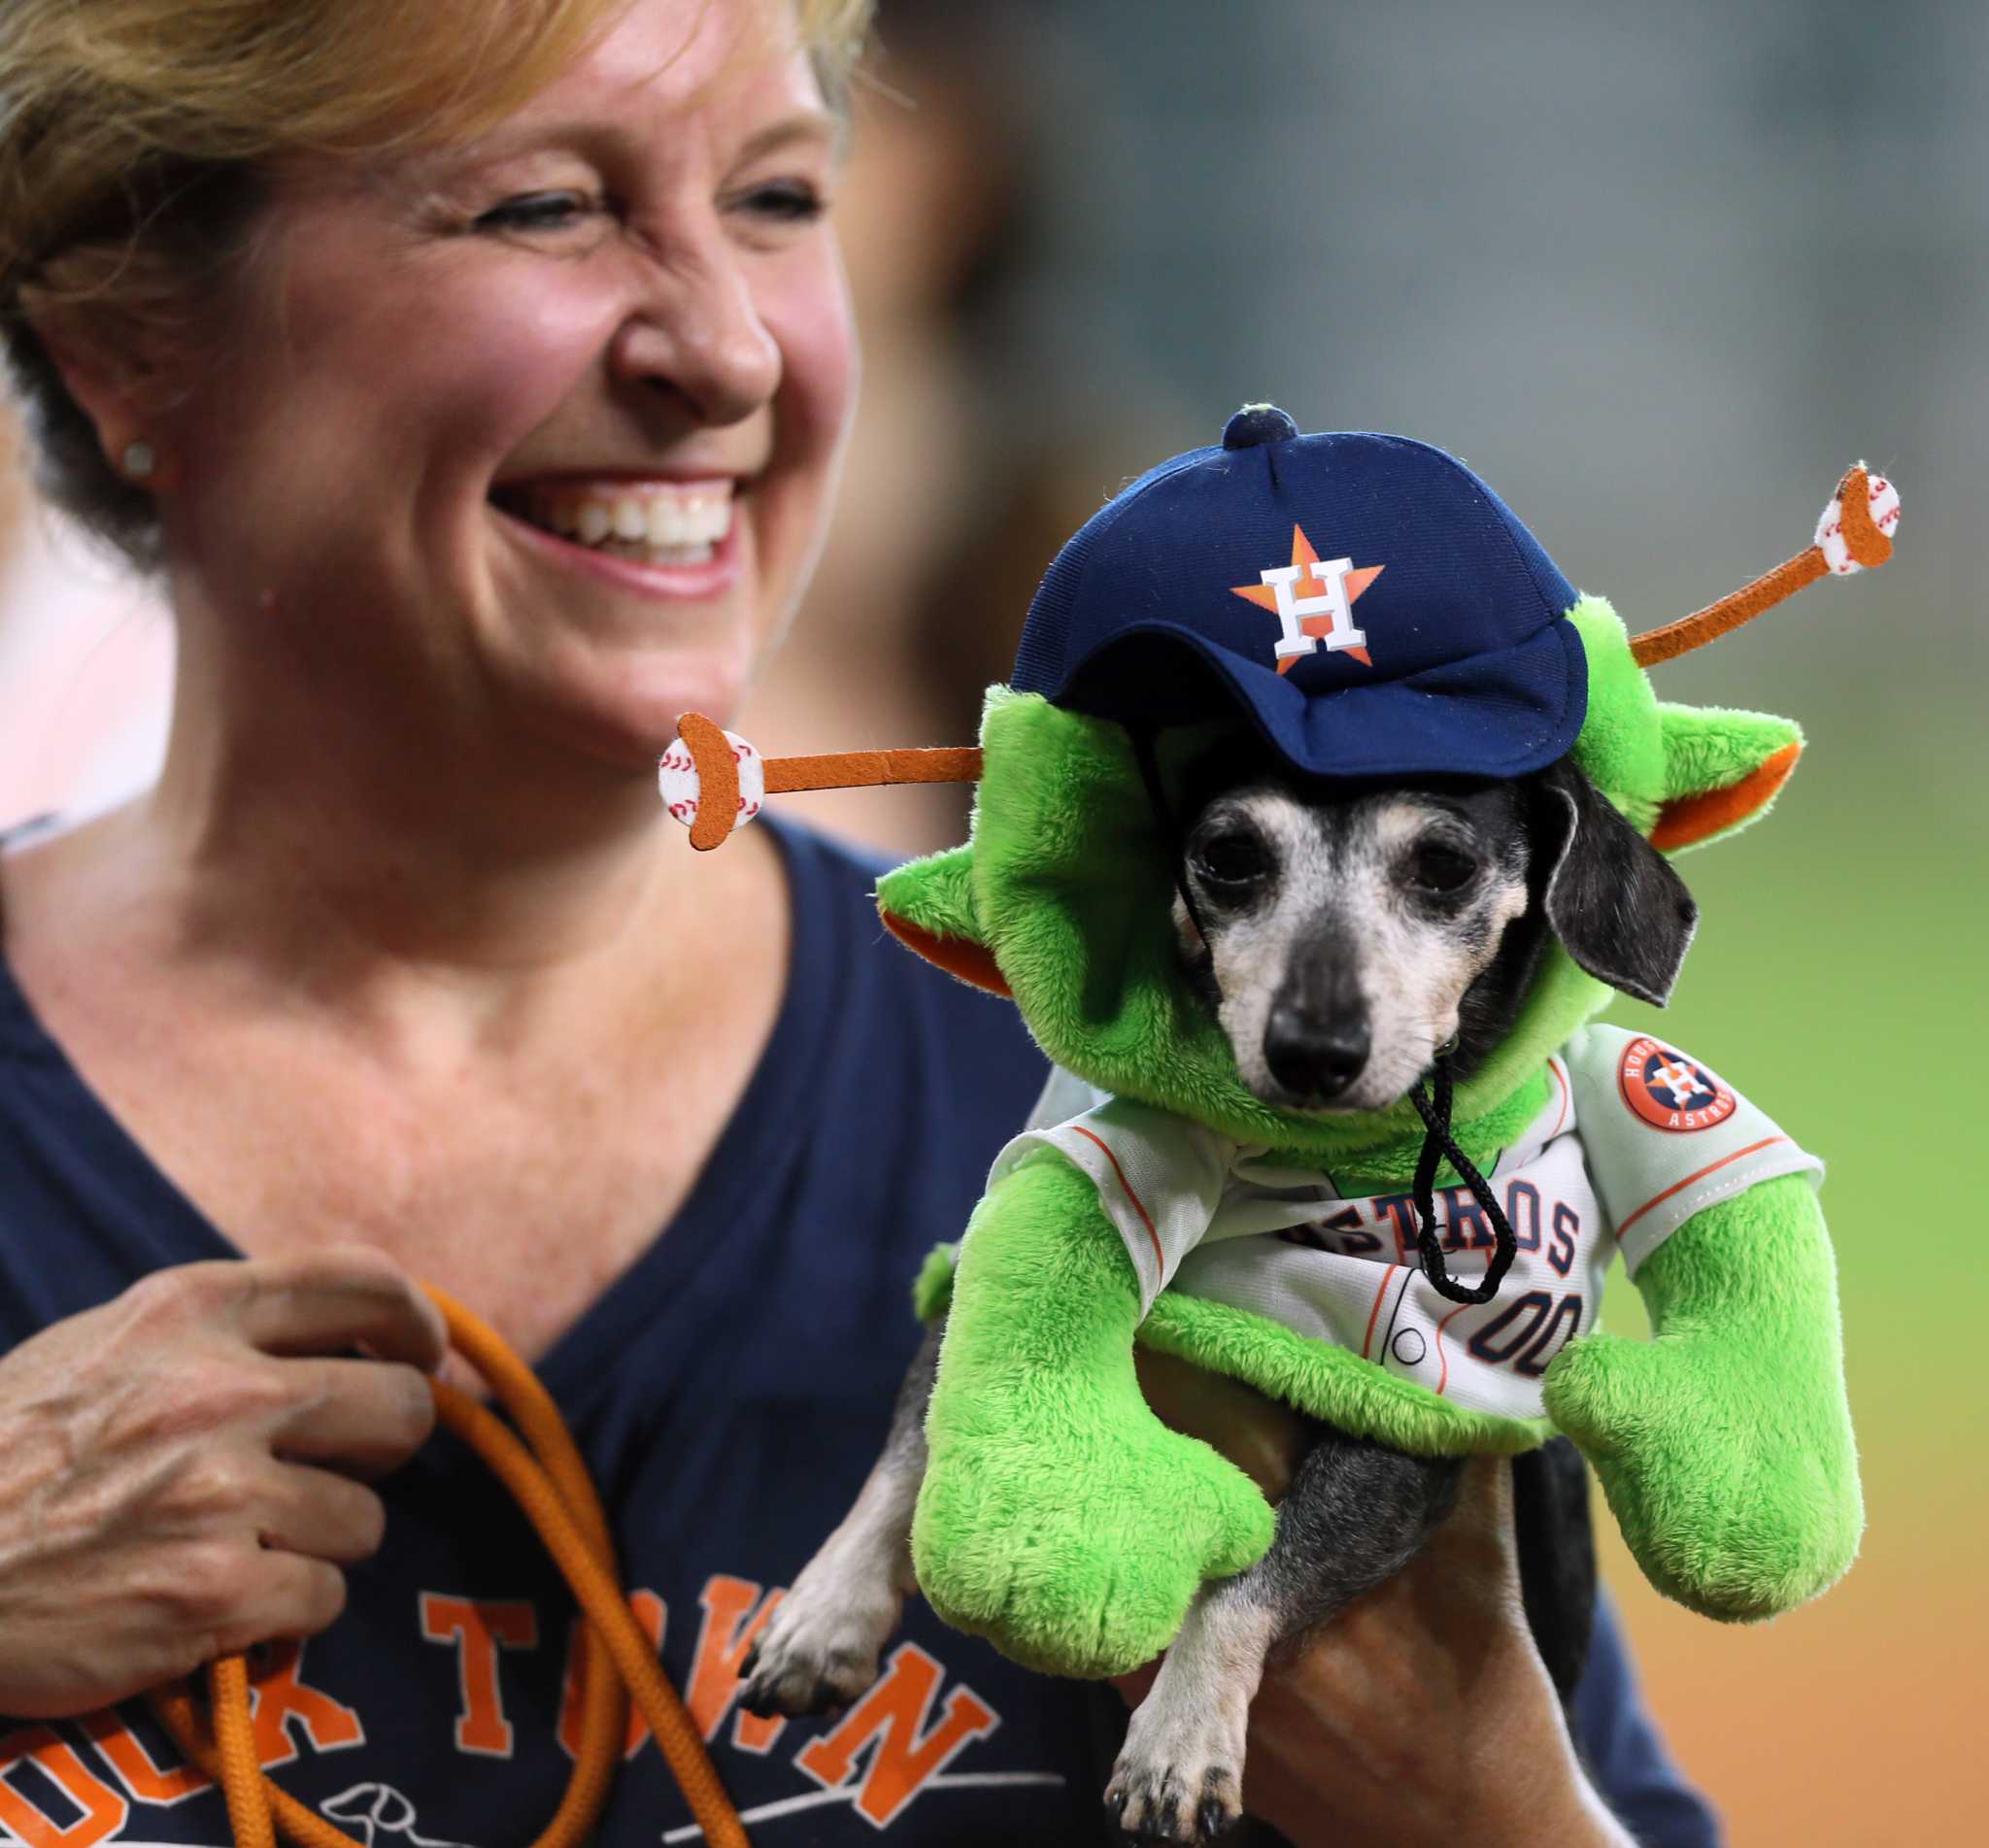 Astro's Dog Day at Minute Maid Park